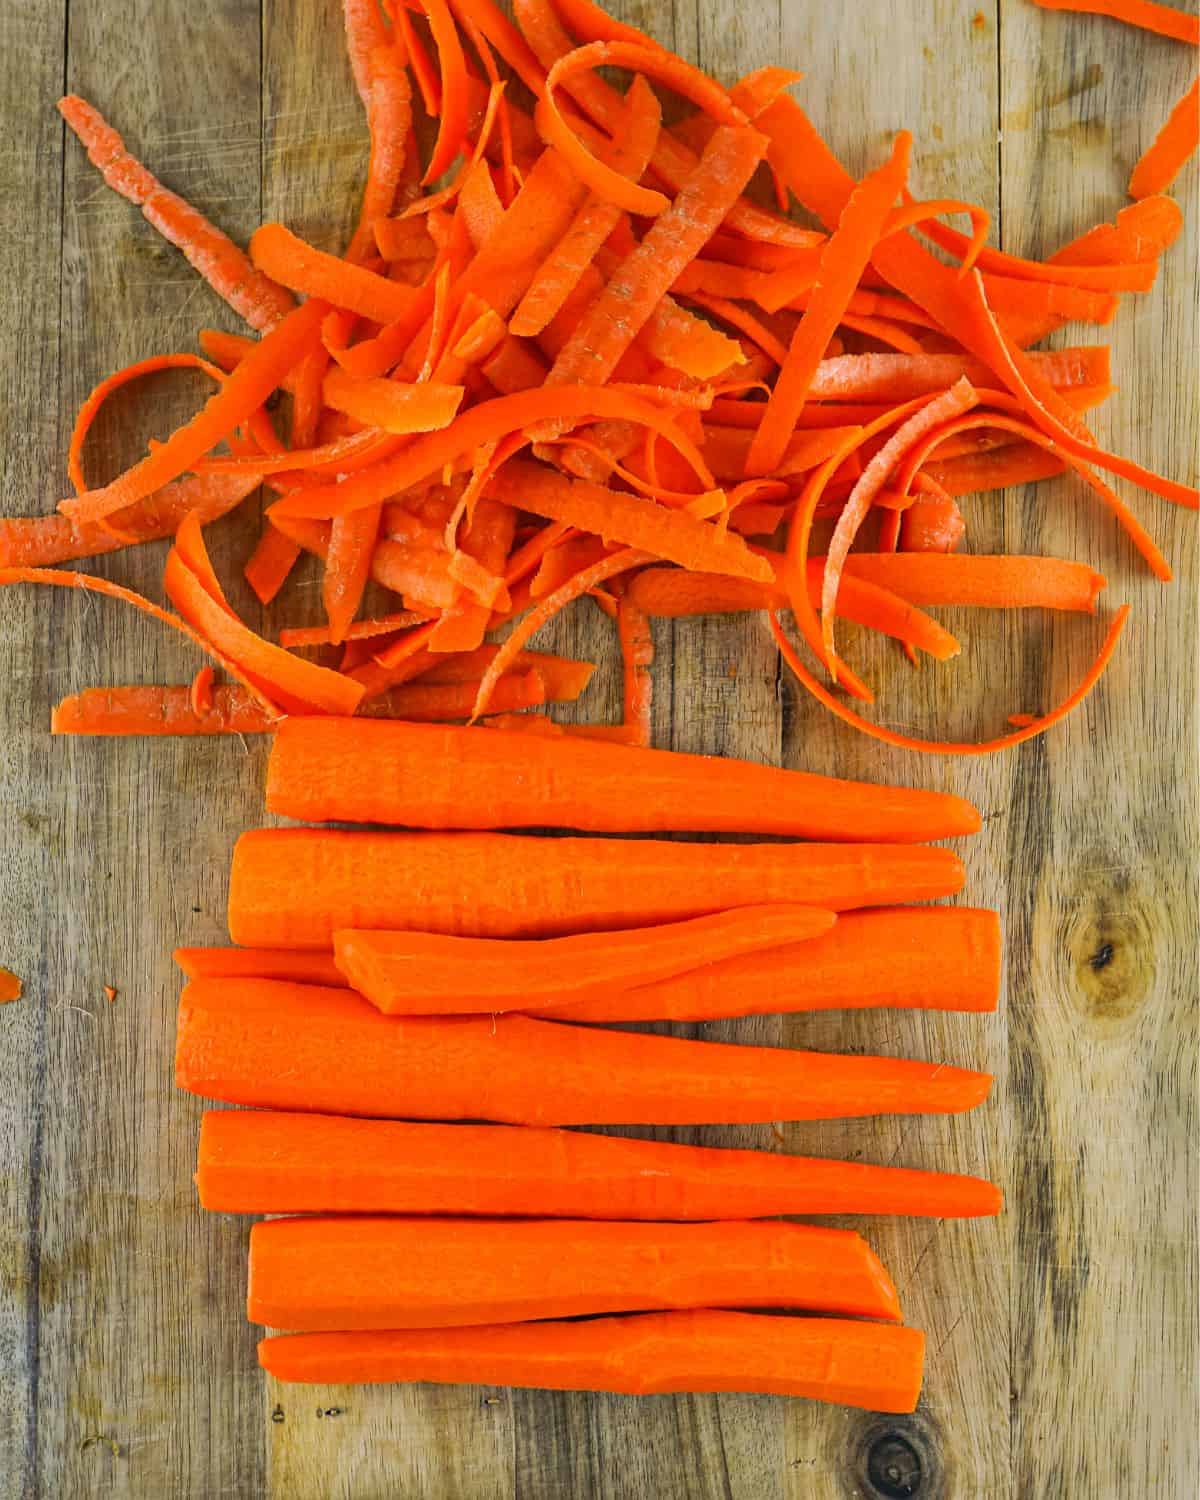 Peeled carrots to make air fryer carrots.